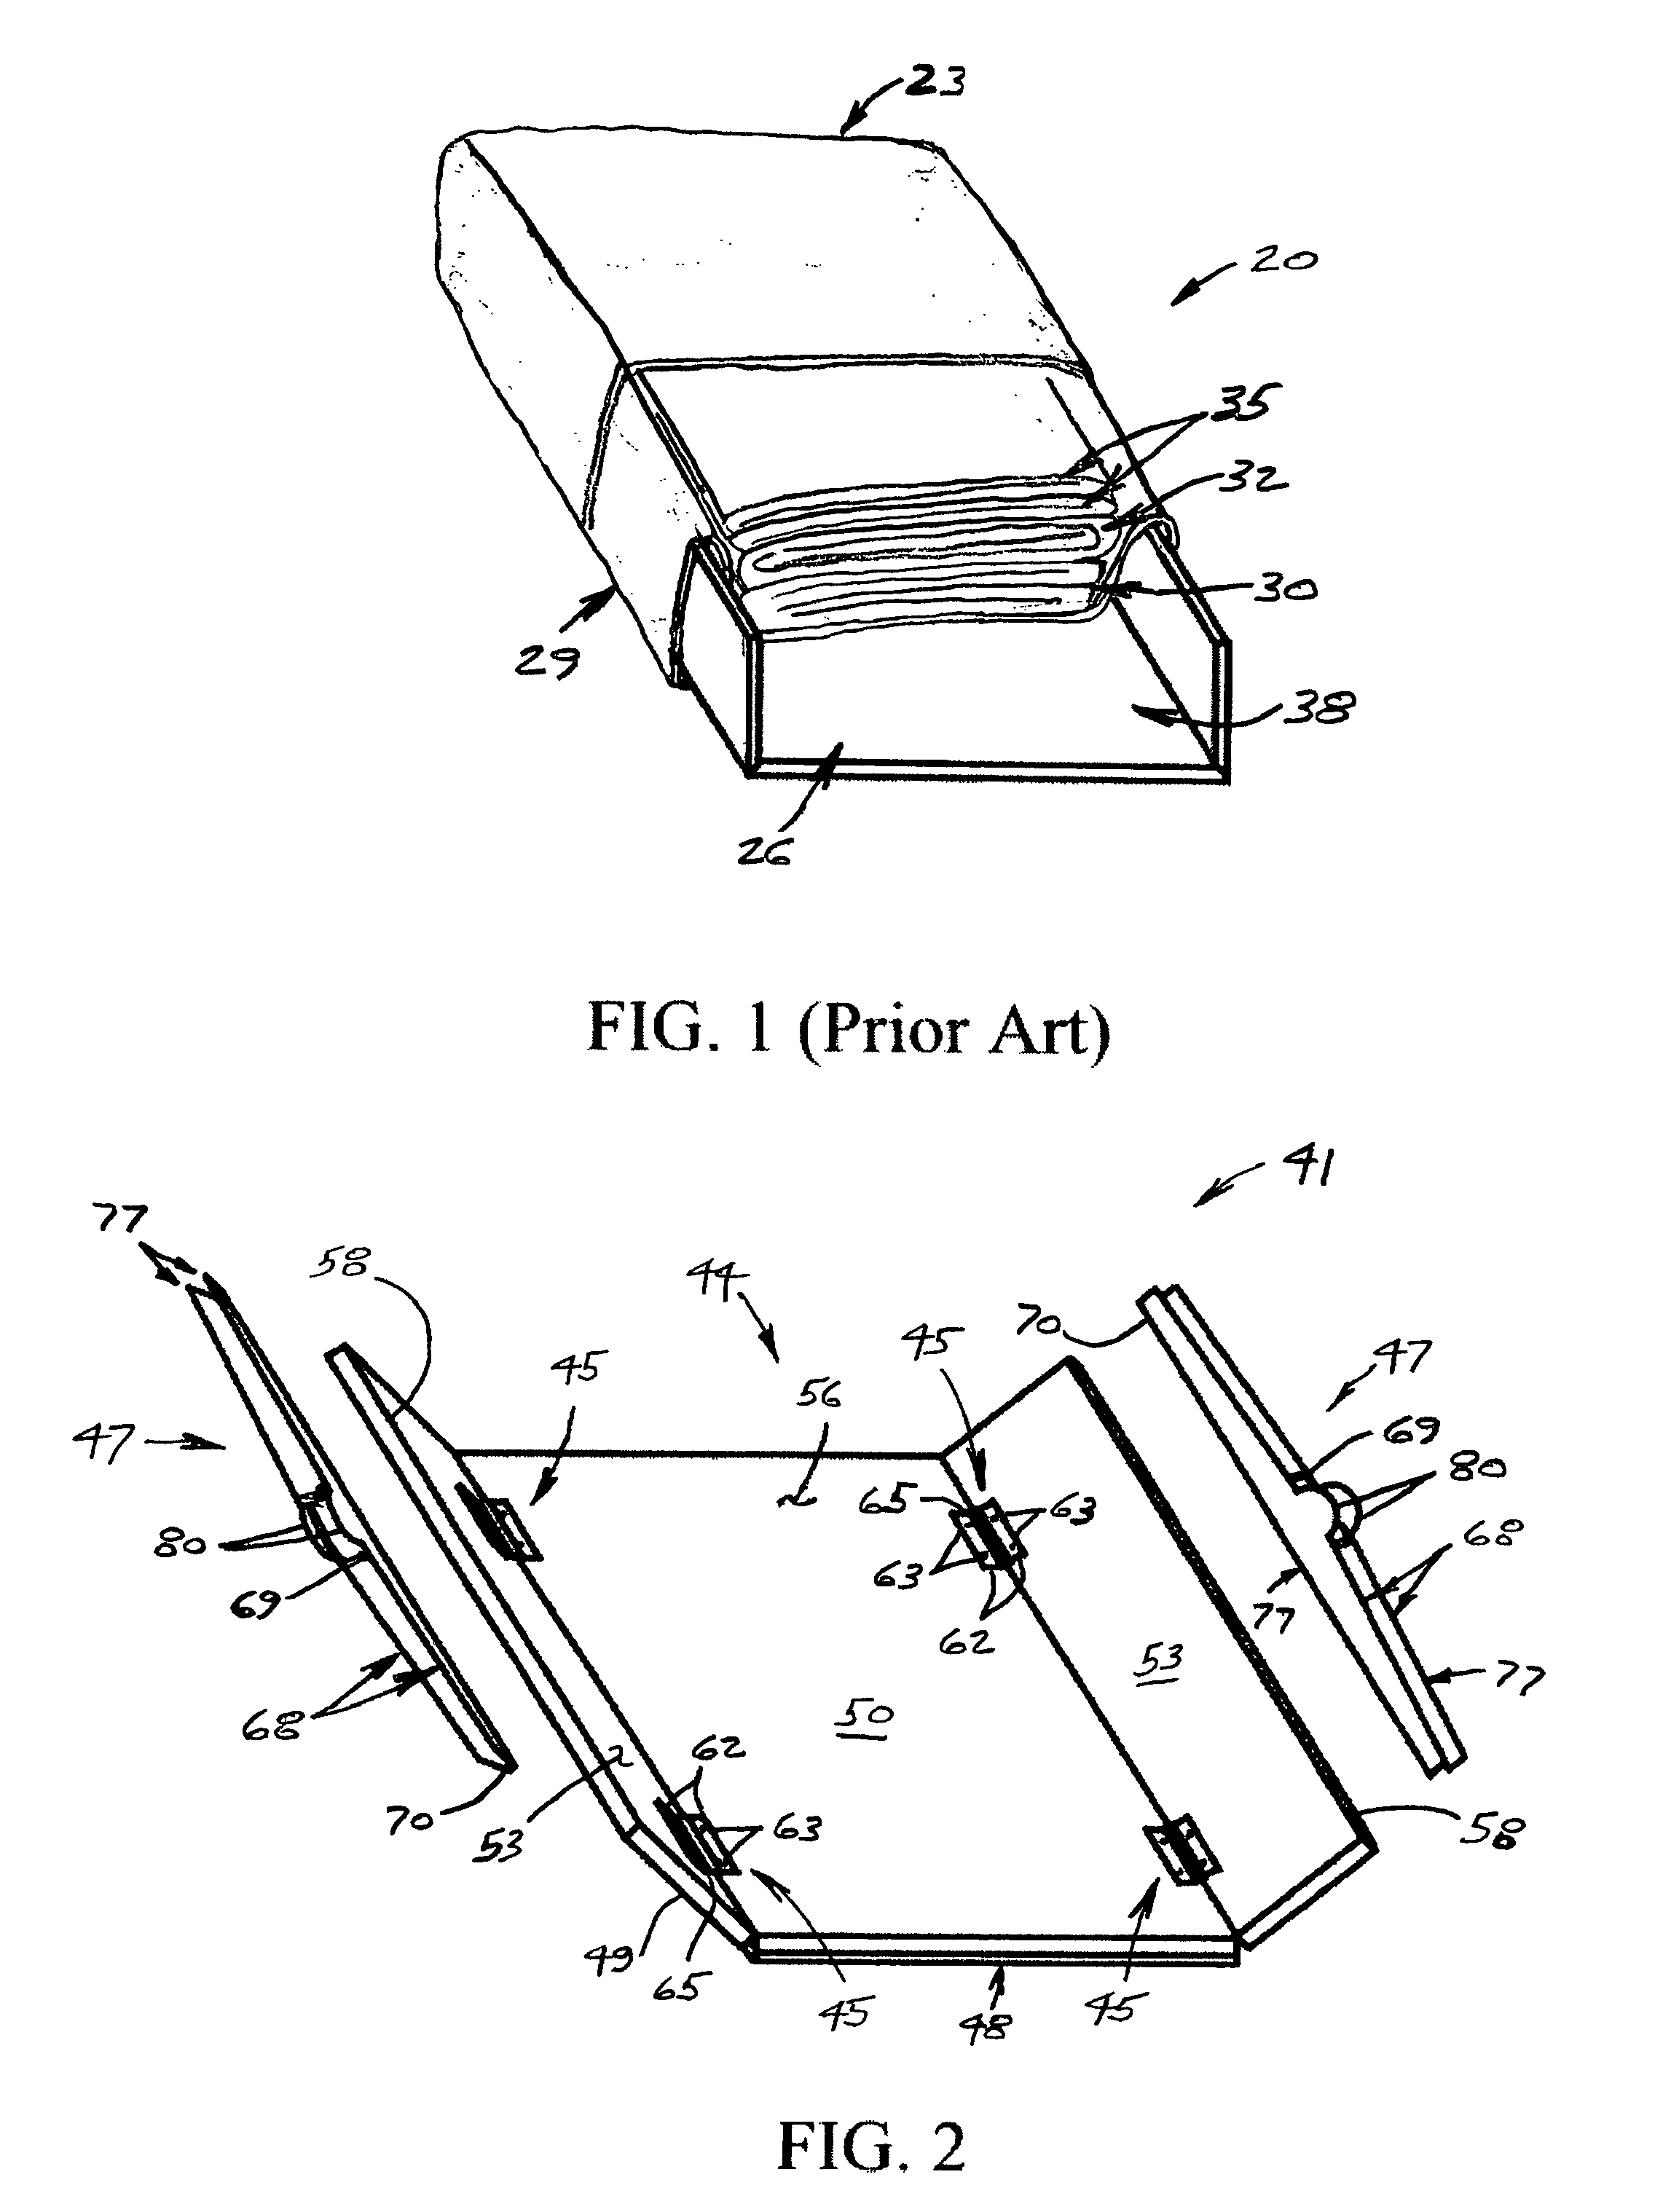 Bed sheet storage device